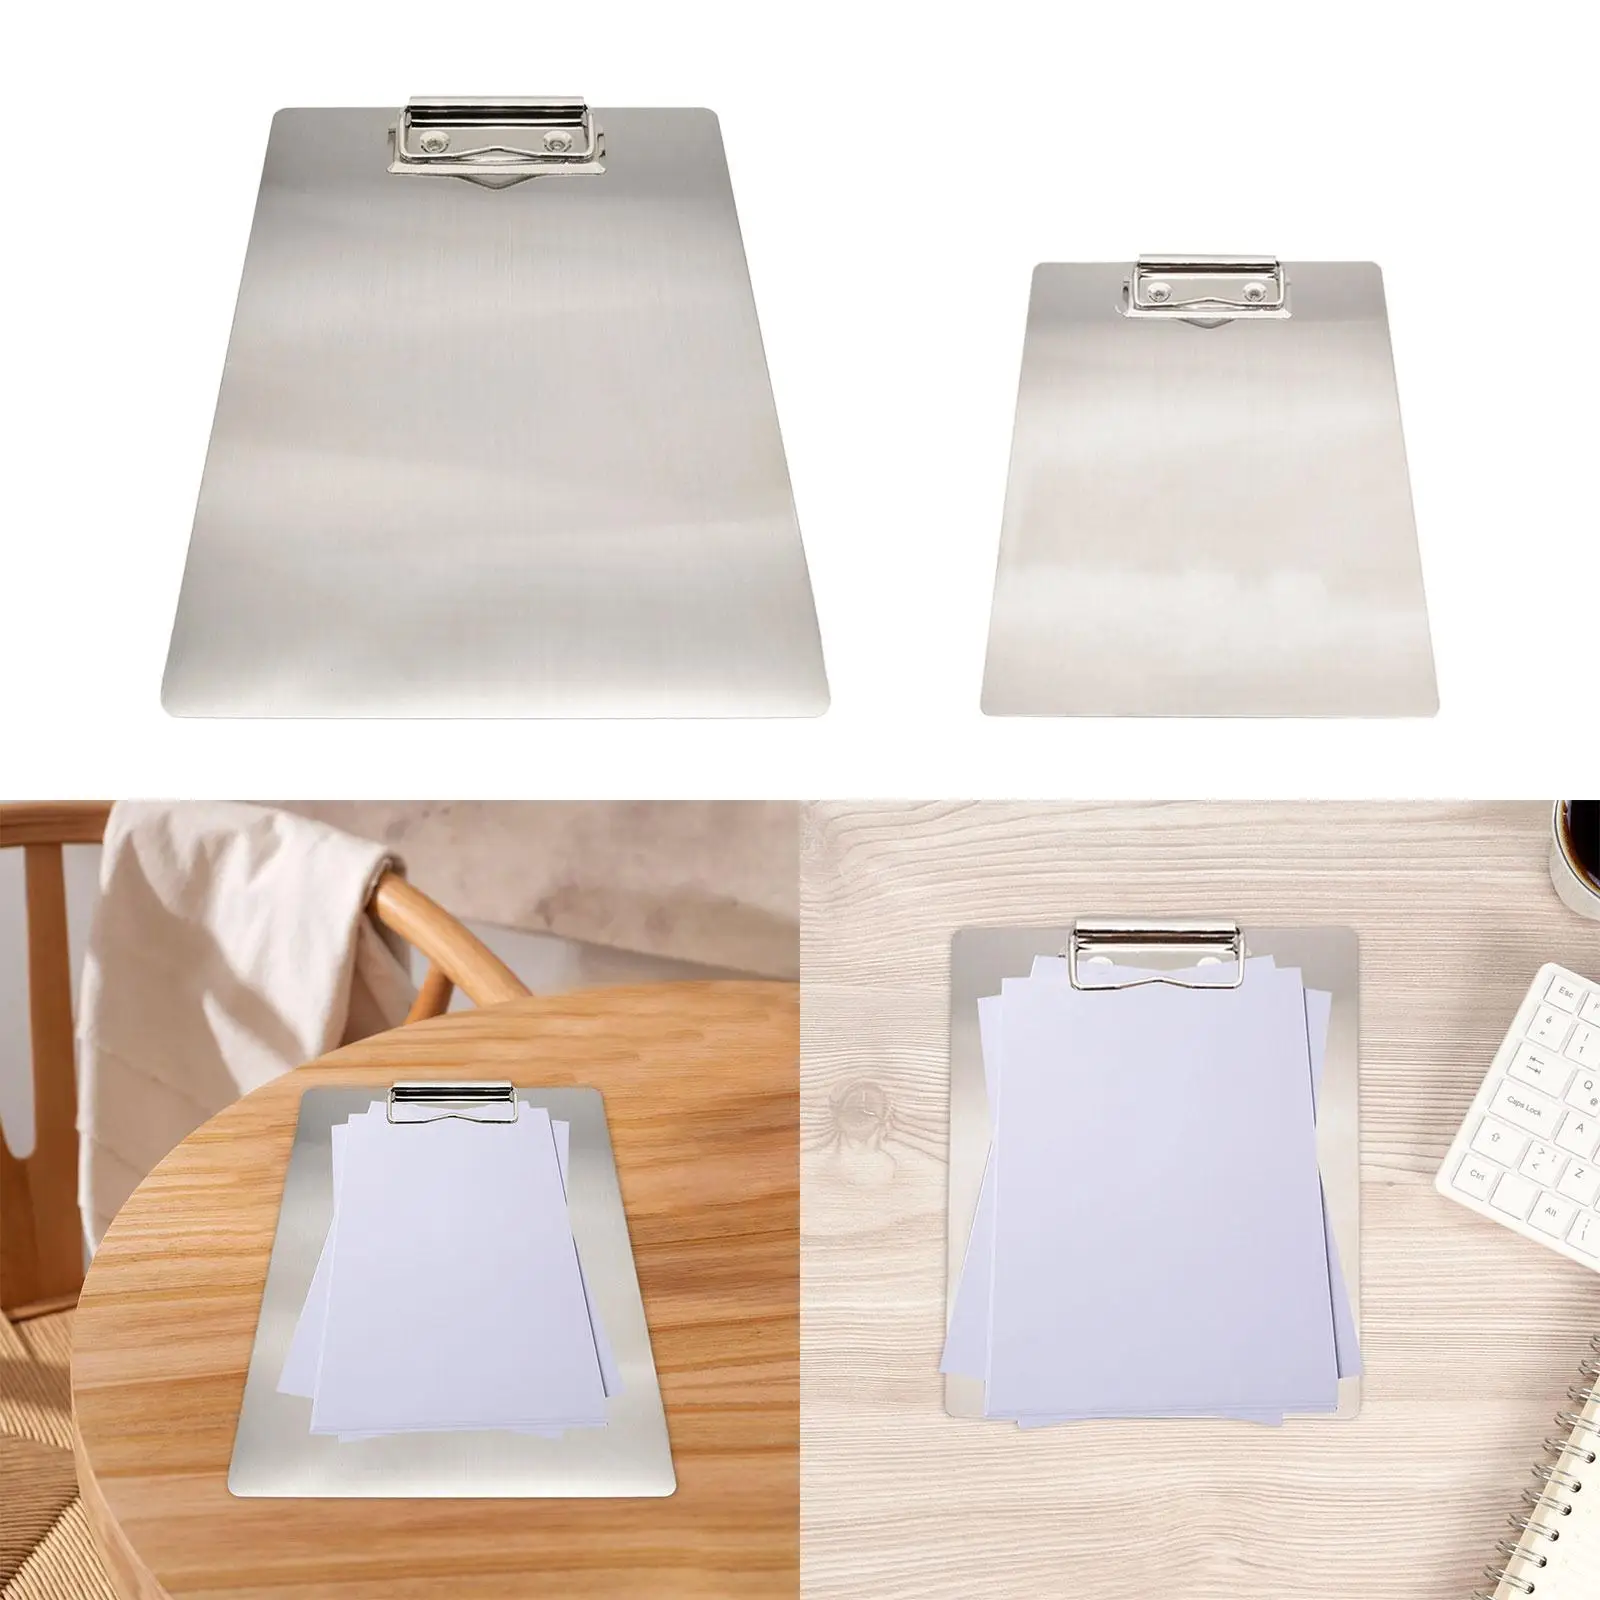 Menu Bill Folder Clipboard Silver Menu Covers Serves Stainless Steel Document Holder for Classroom Drawing Business Forms Notes